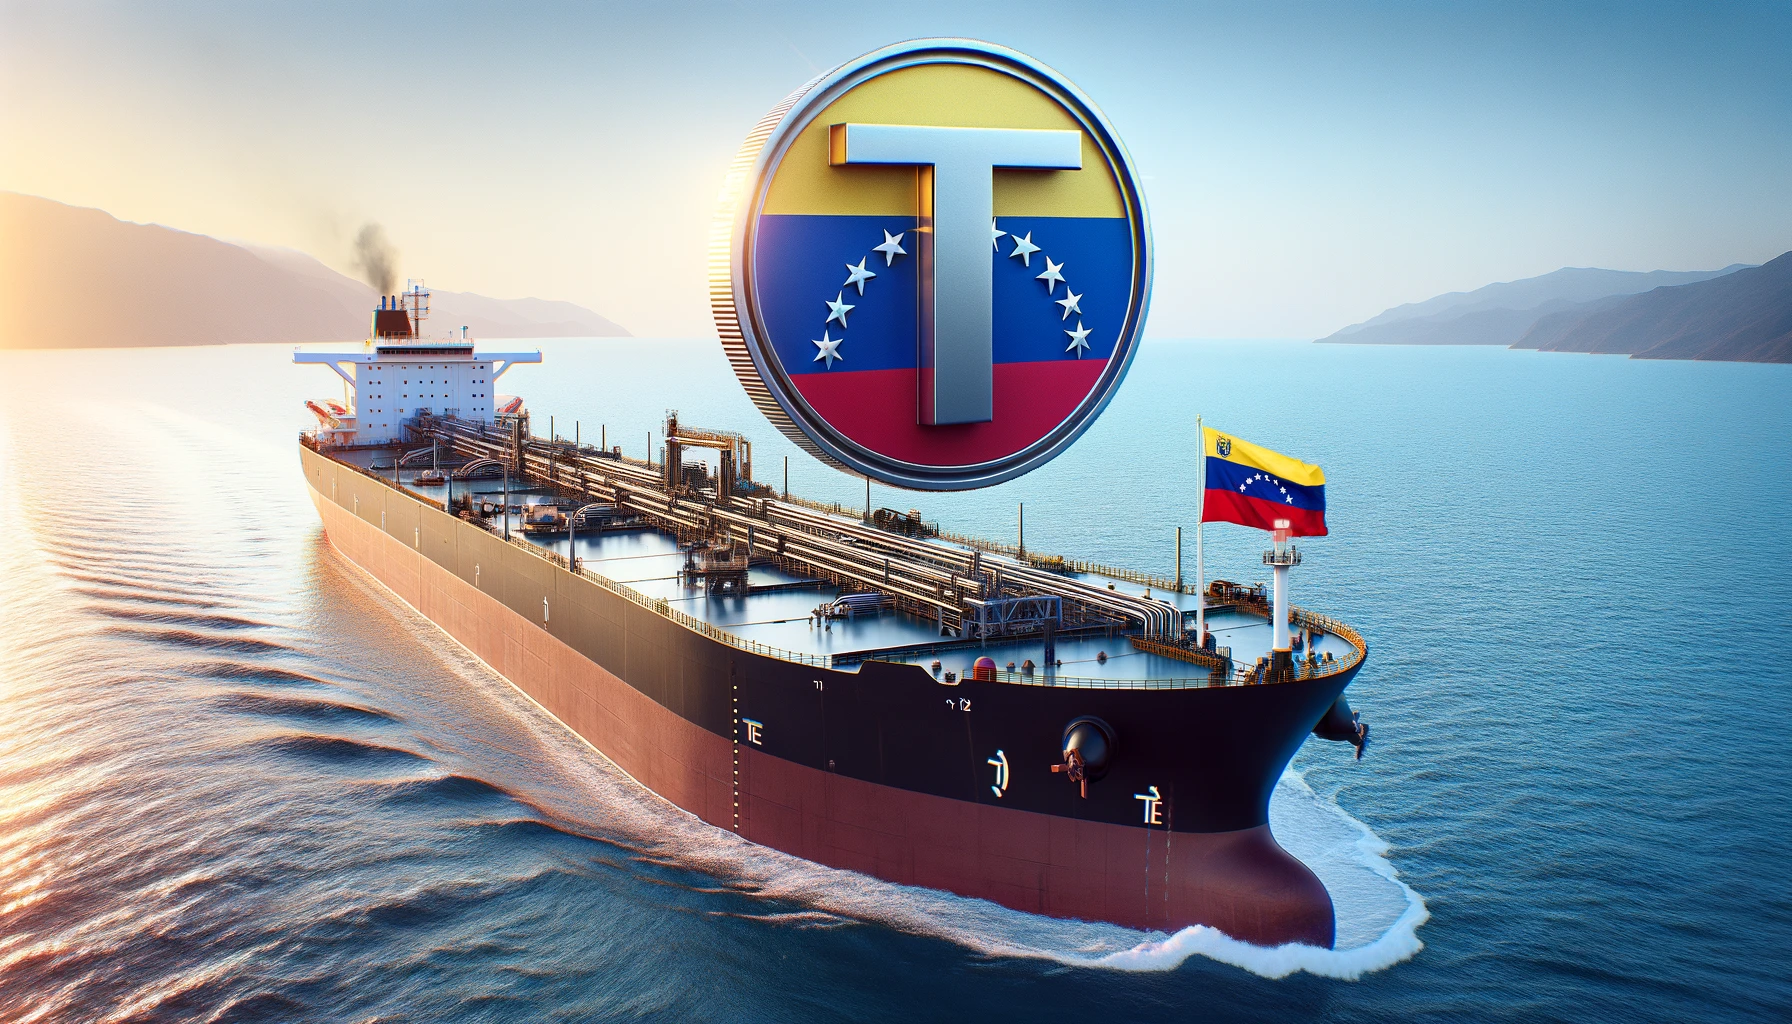 Venezuela bets on Tether cryptocurrency to skirt oil sanctions